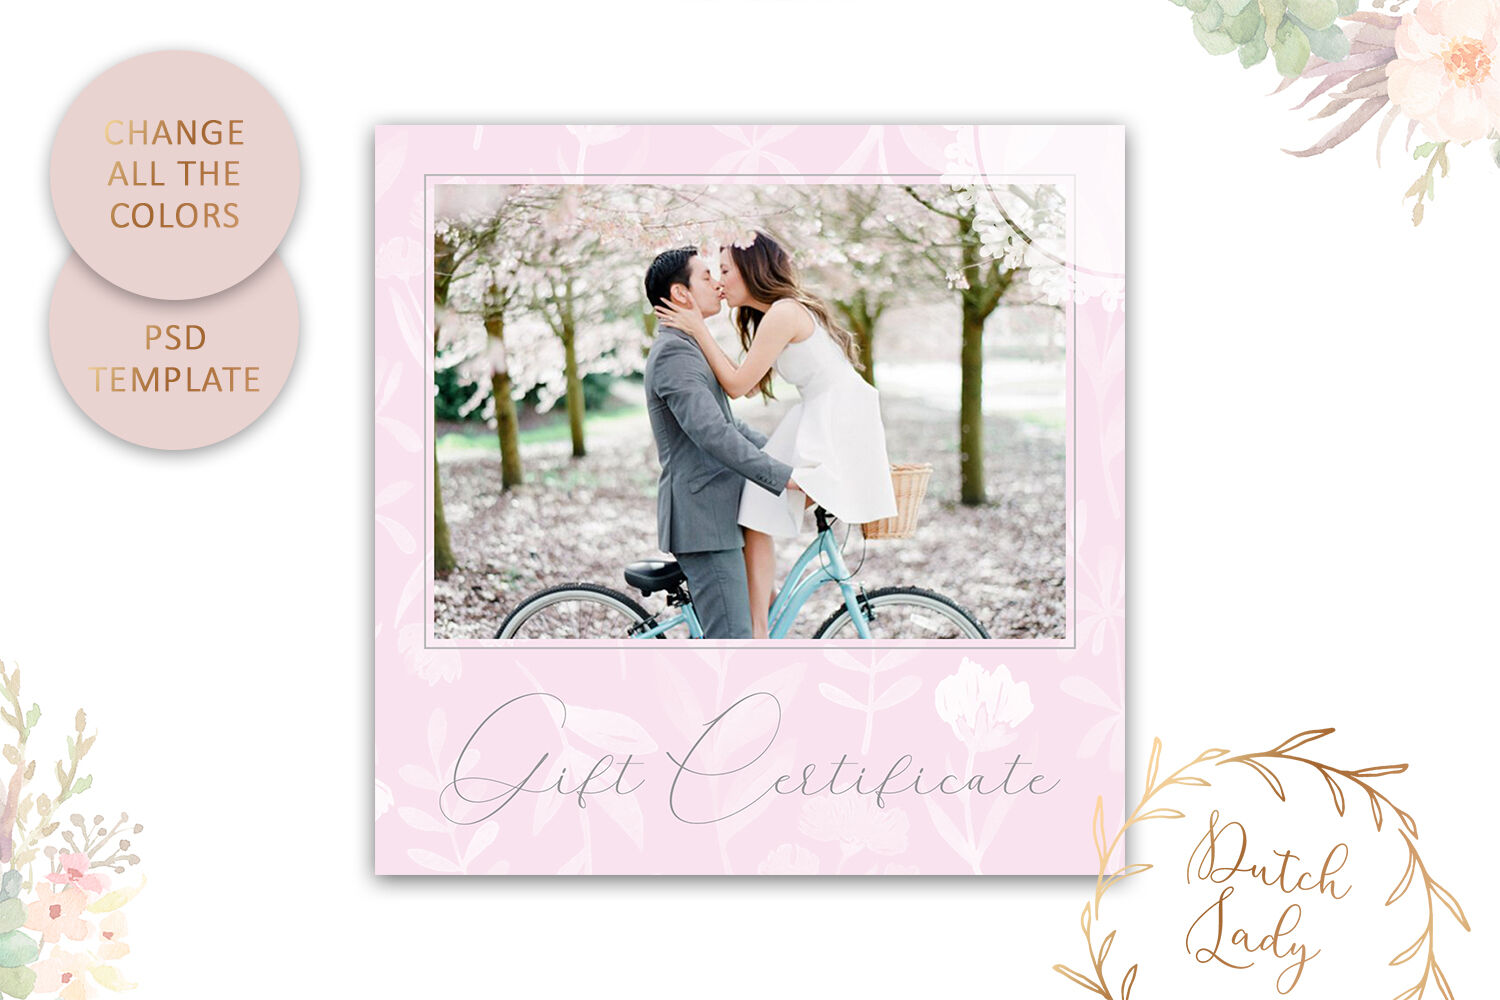 PSD Photo Gift Card Template #46 By The Dutch Lady Designs | TheHungryJPEG